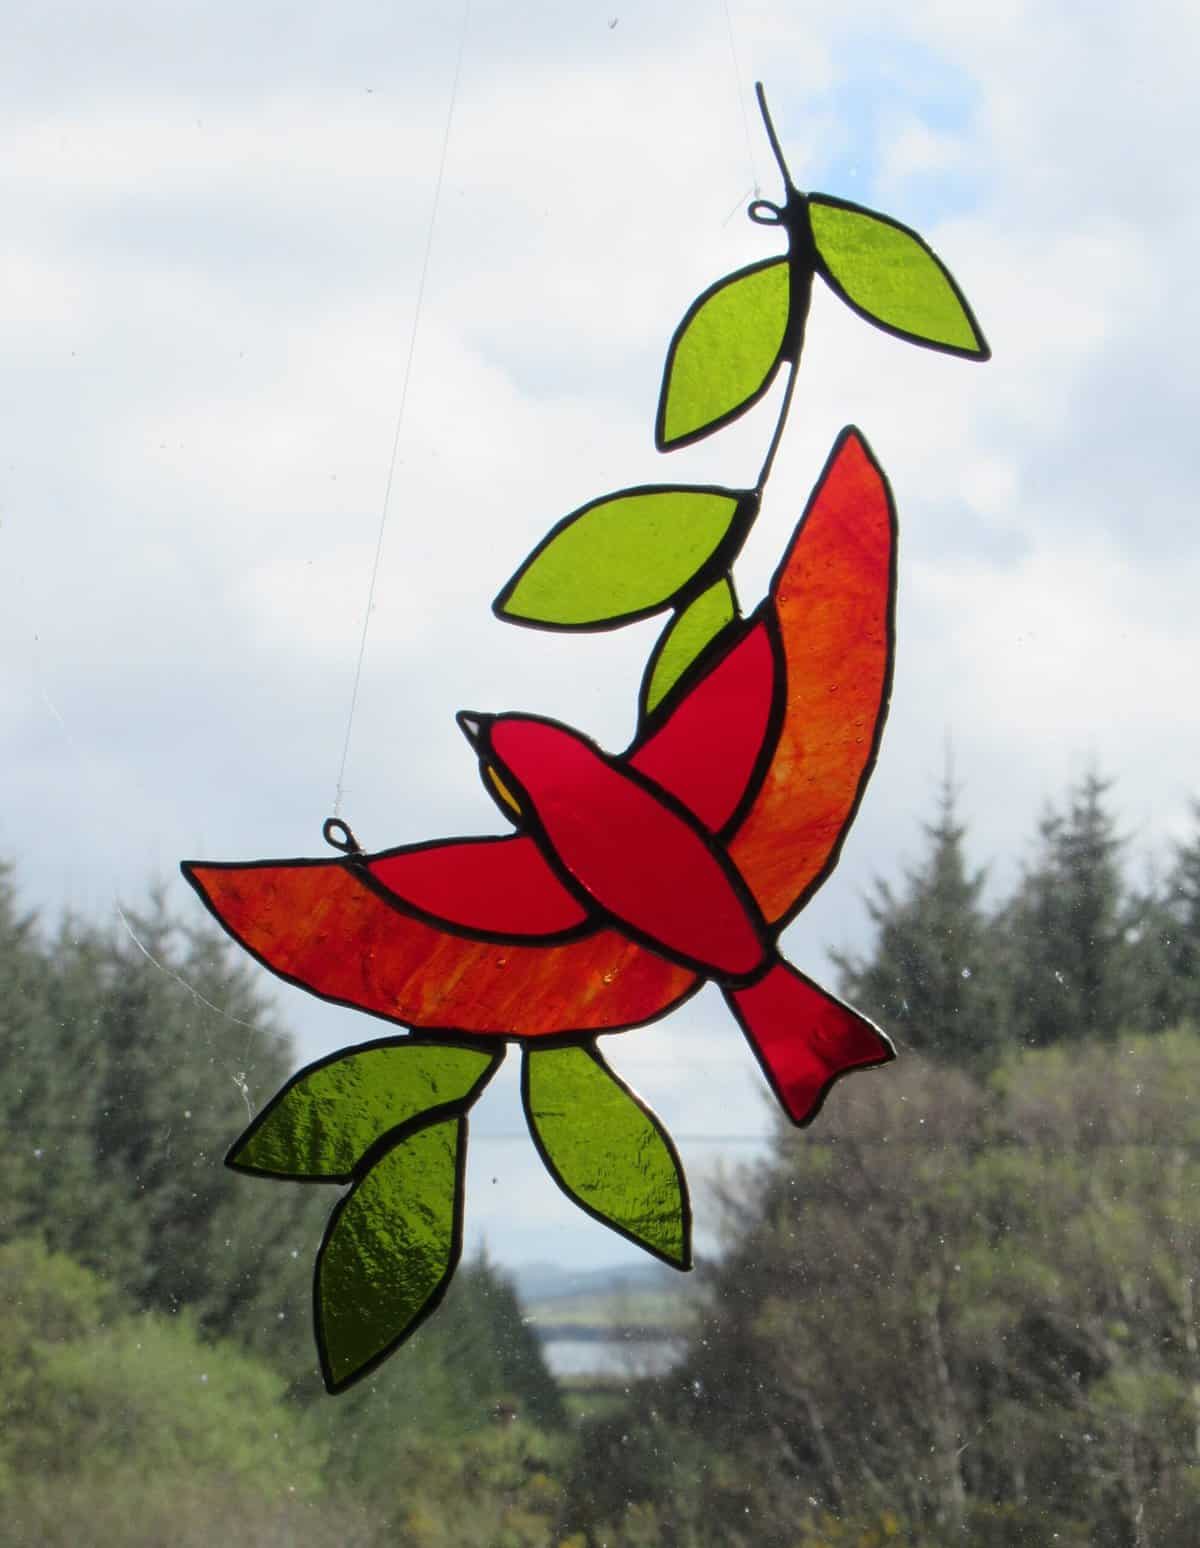 New Work in Stained Glass